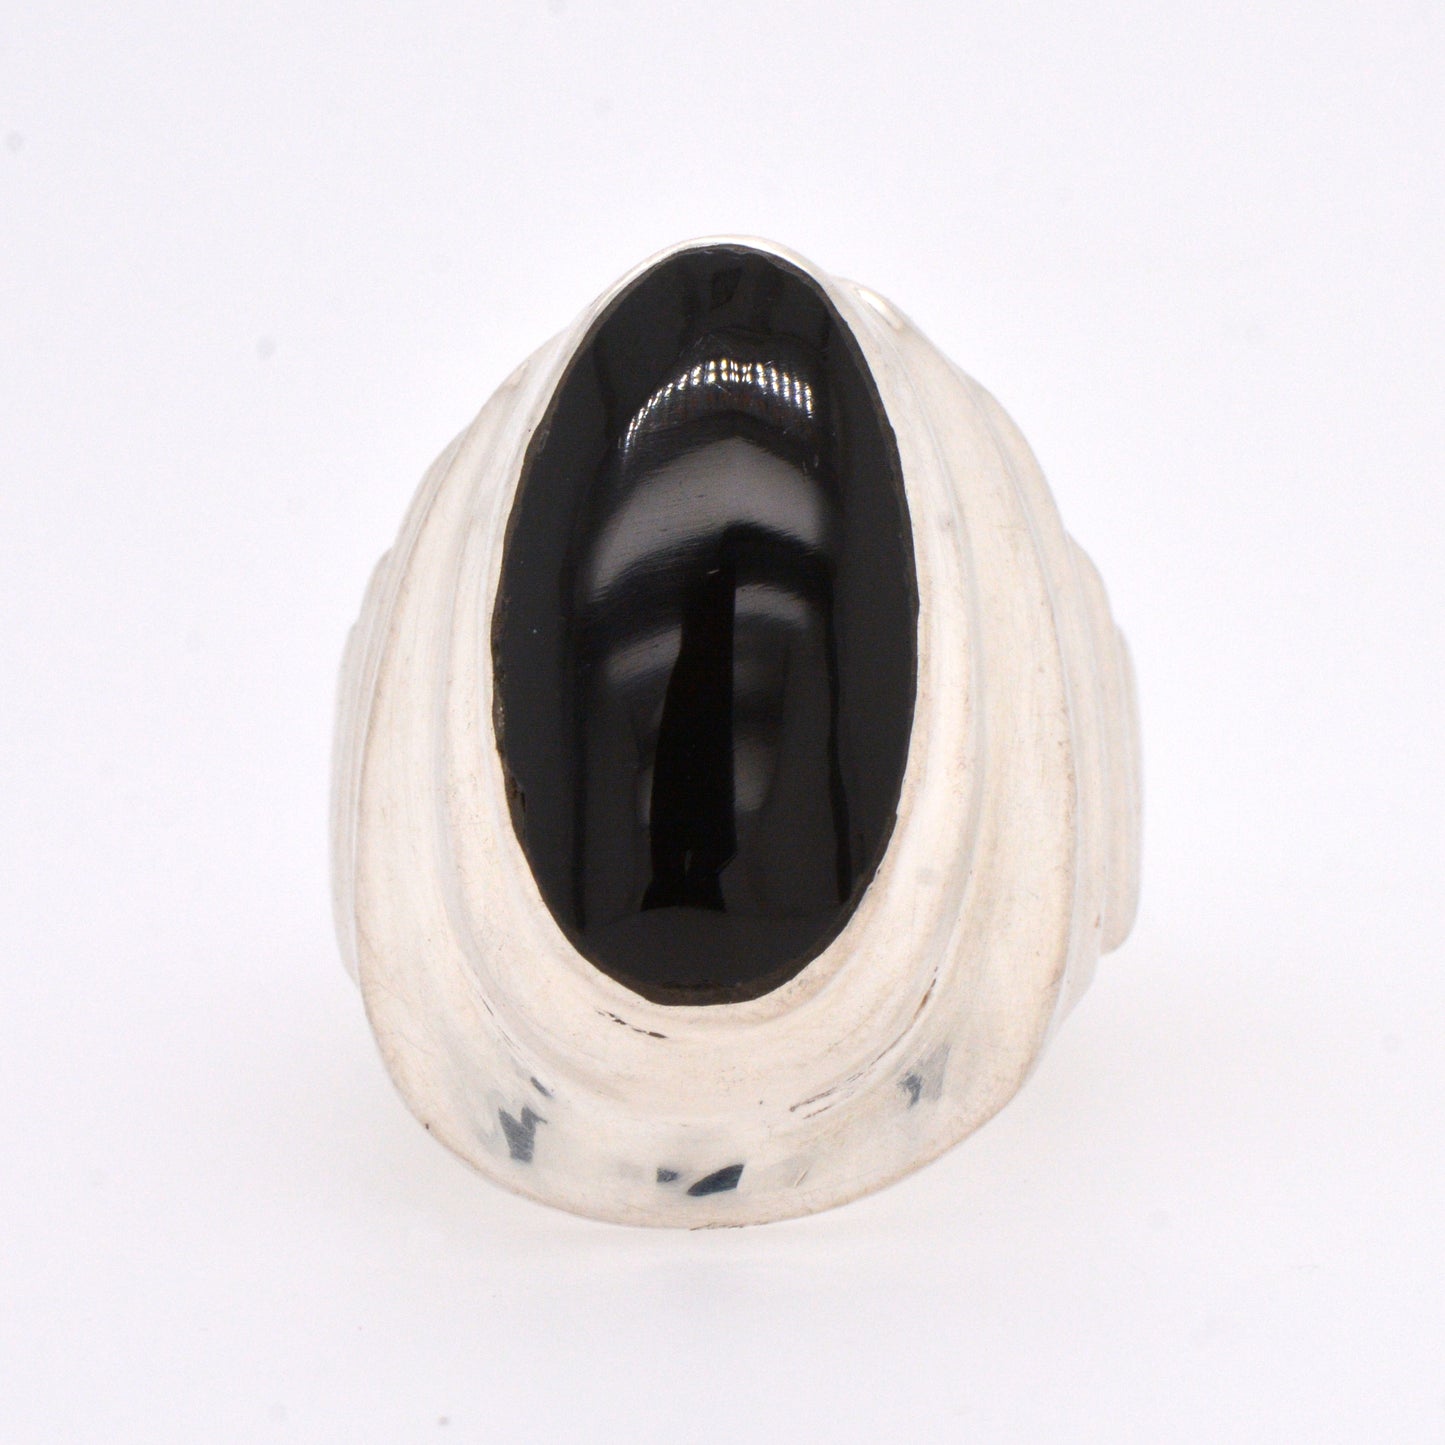 Sterling Silver and Black Onyx Ring